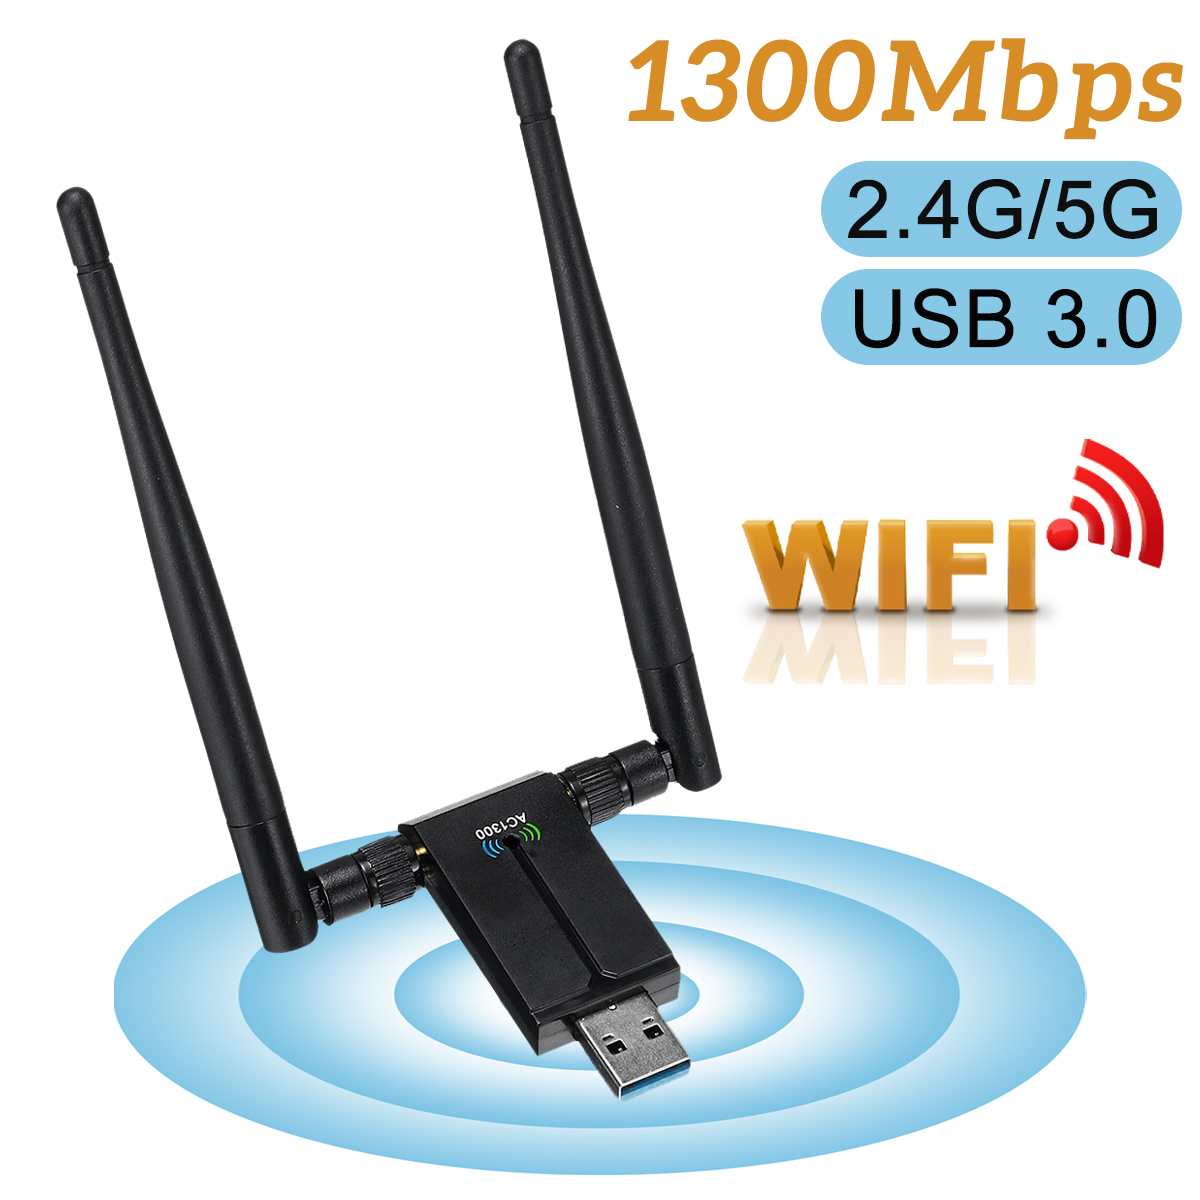 1300M-Wireless-Network-Card-USB30-Wifi-Adapter-Dual-band-24G5G-1300Mbps-WAntenna-Through-the-Wall-Gi-1961435-1